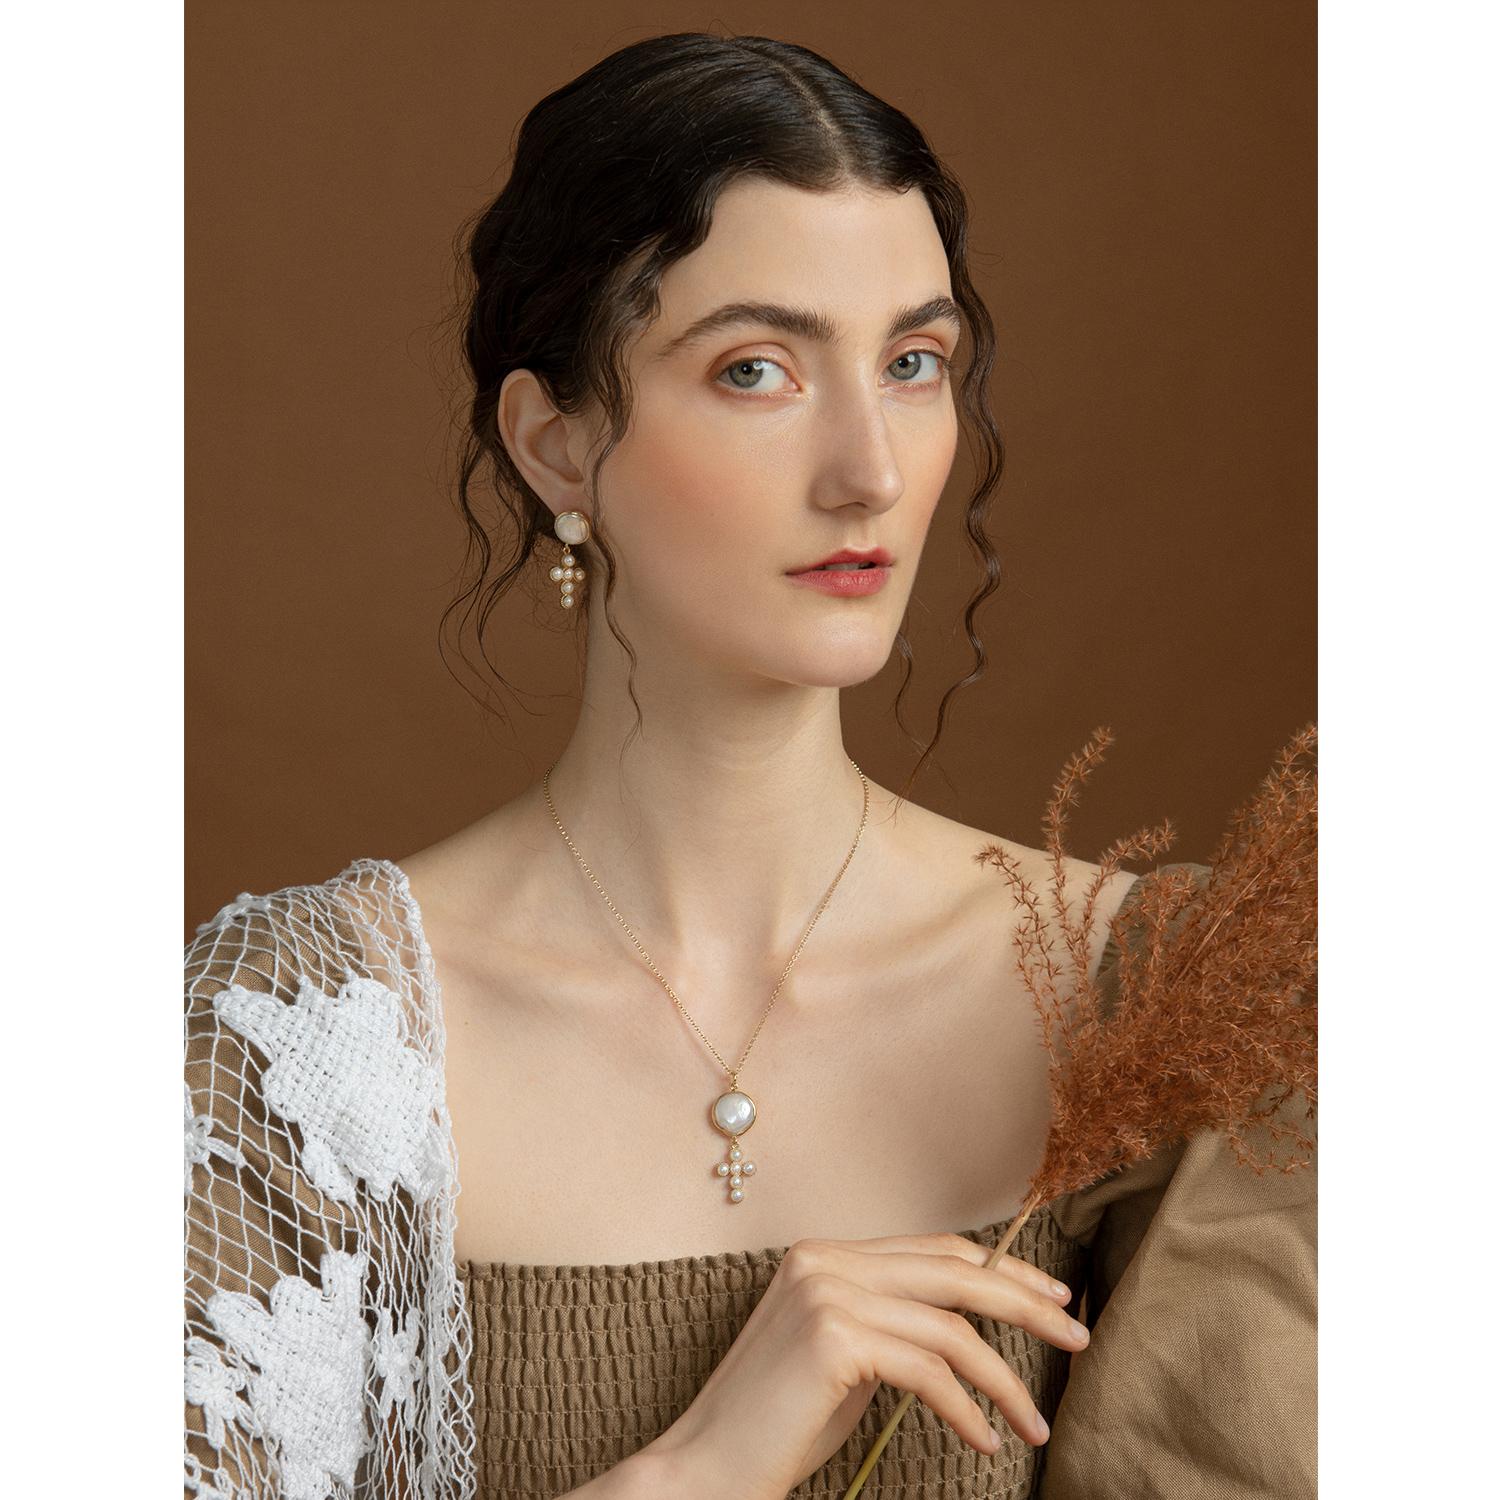 The artistic heritage of Italy is the primary source of inspiration for the jewelry designed by Vintouch, which is made by only using the highest quality raw materials. Handcrafted from 18-karat gold-plated silver, this Hope gold-plated pearl